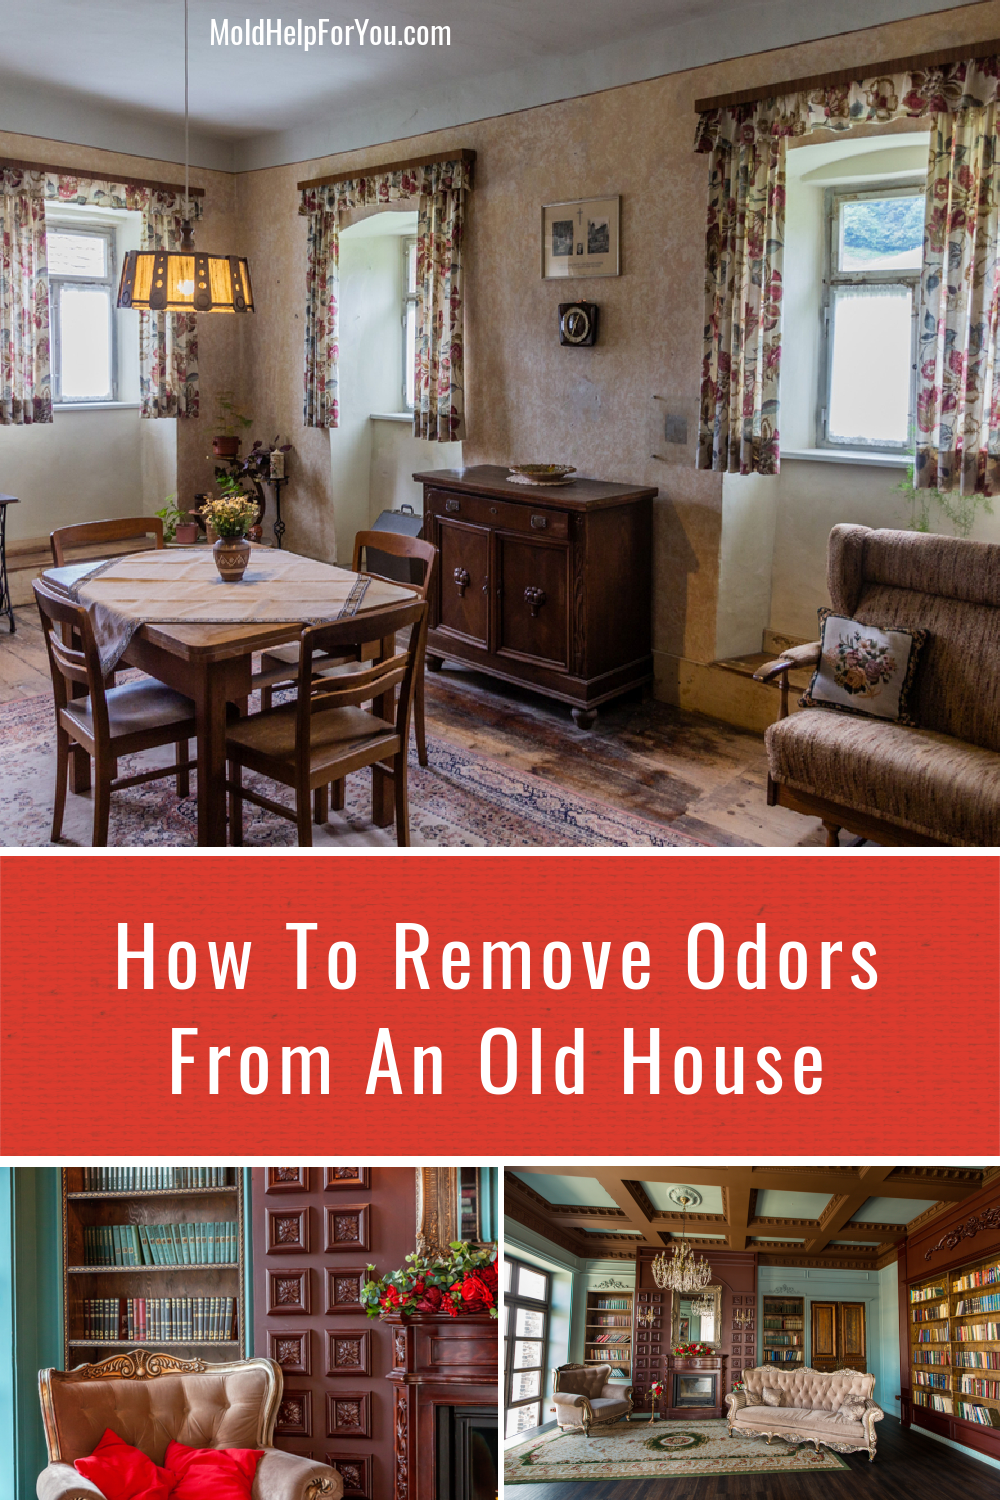 A collage with three images of the inside of old houses. The top image is a kitchen area from a house from the 1970's. The other two images are from old Victorian homes in the sitting rooms. "How to remove odors from an old house" is written in the center across a red background. 